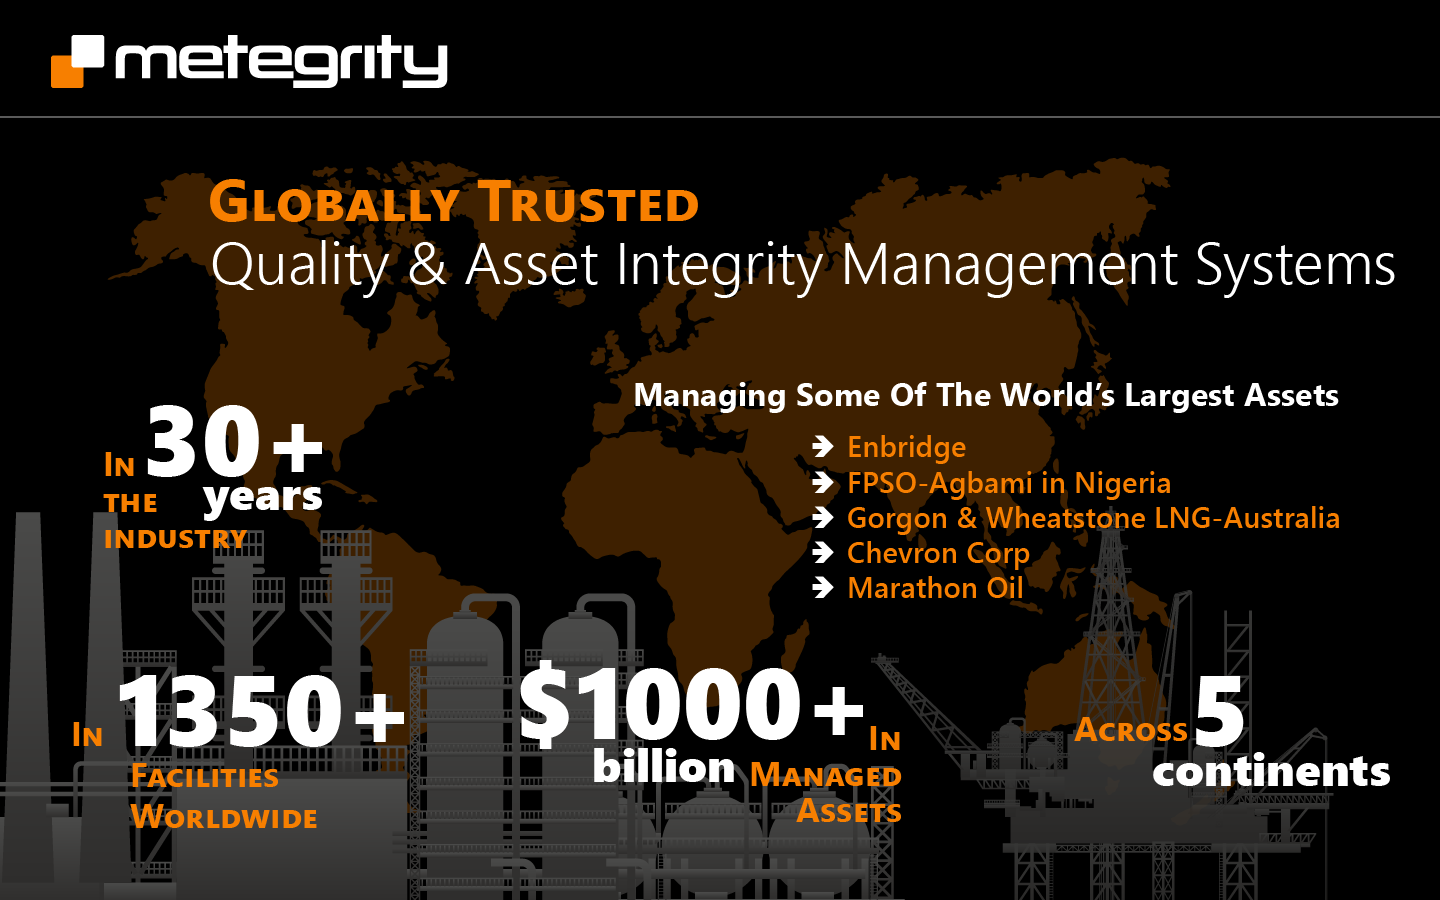 Metegrity at a glance: Globally trusted quality & asset management systems, managing some of the world's largest assets (FPSO-Agabami in Nigeria, Gorgon & Wheatstone LNG Australia, Chevron Corp, Marathon Oil), +30 years in the industry, in over 1350 facilities worldwide, +$1000 billion in managed assets across 5 continents.